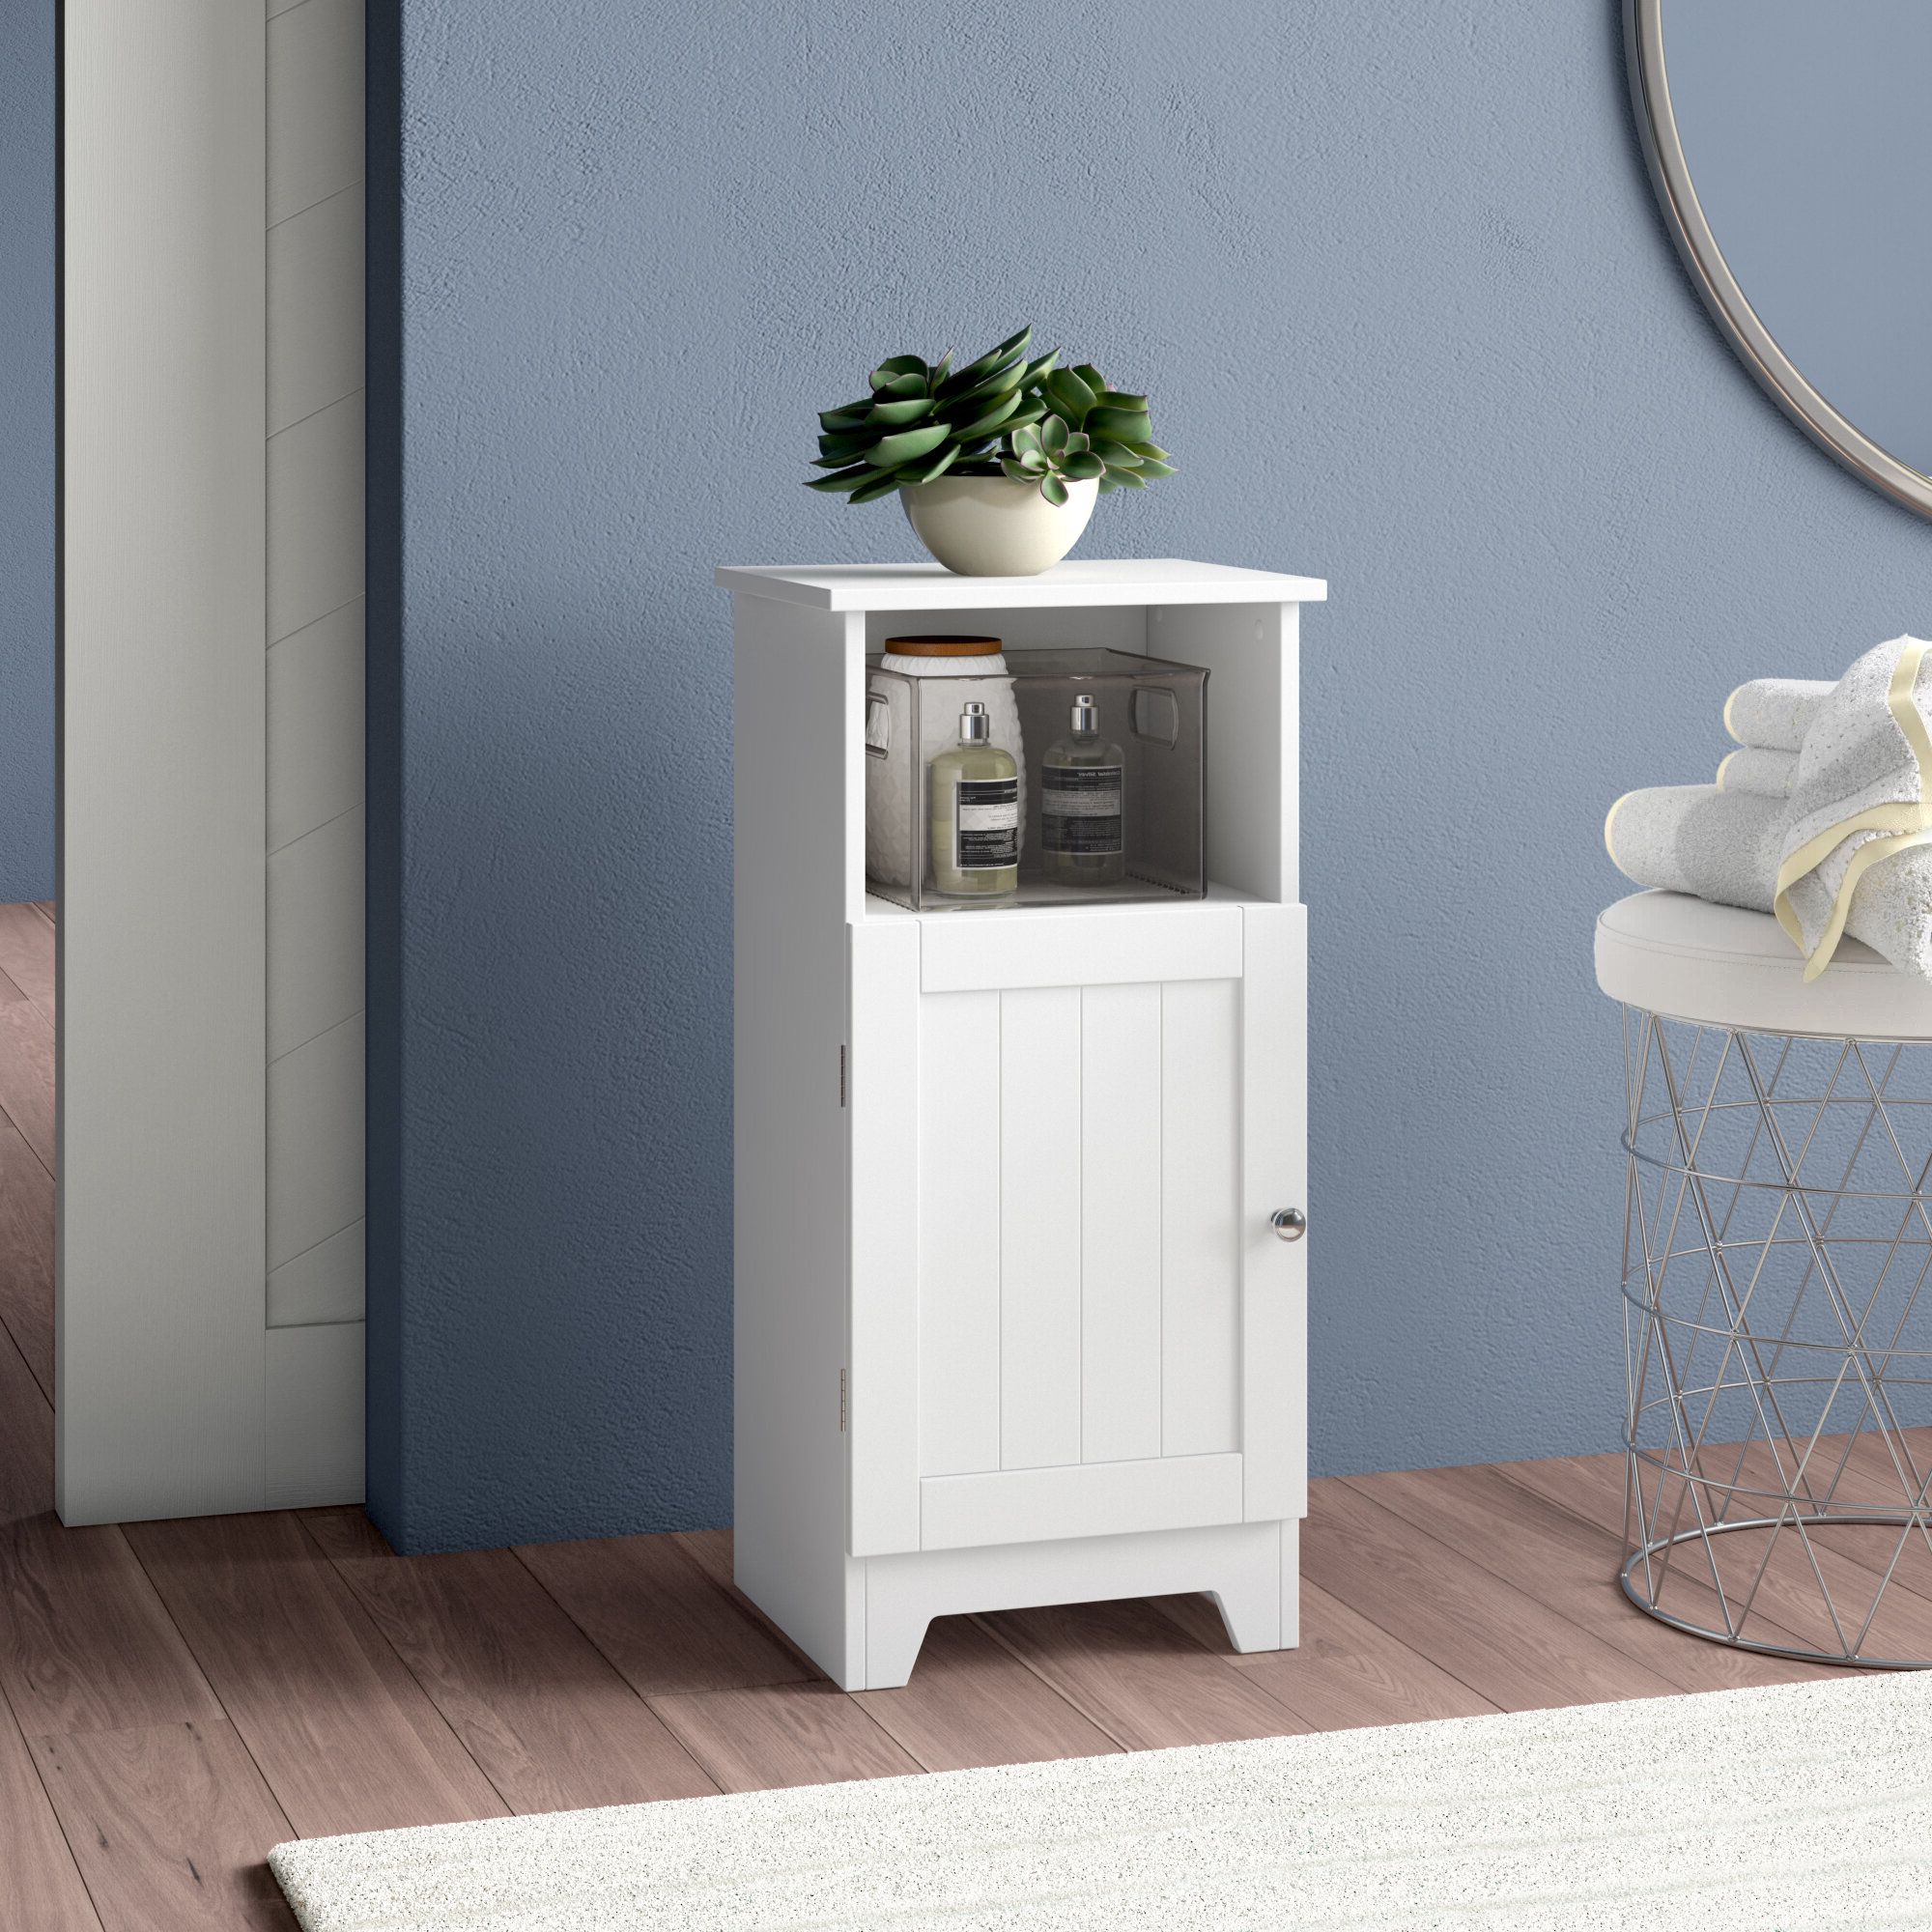 Rebrilliant Freestanding Bathroom Cabinet & Reviews | Wayfair For Freestanding Tables With Drawers (View 17 of 20)